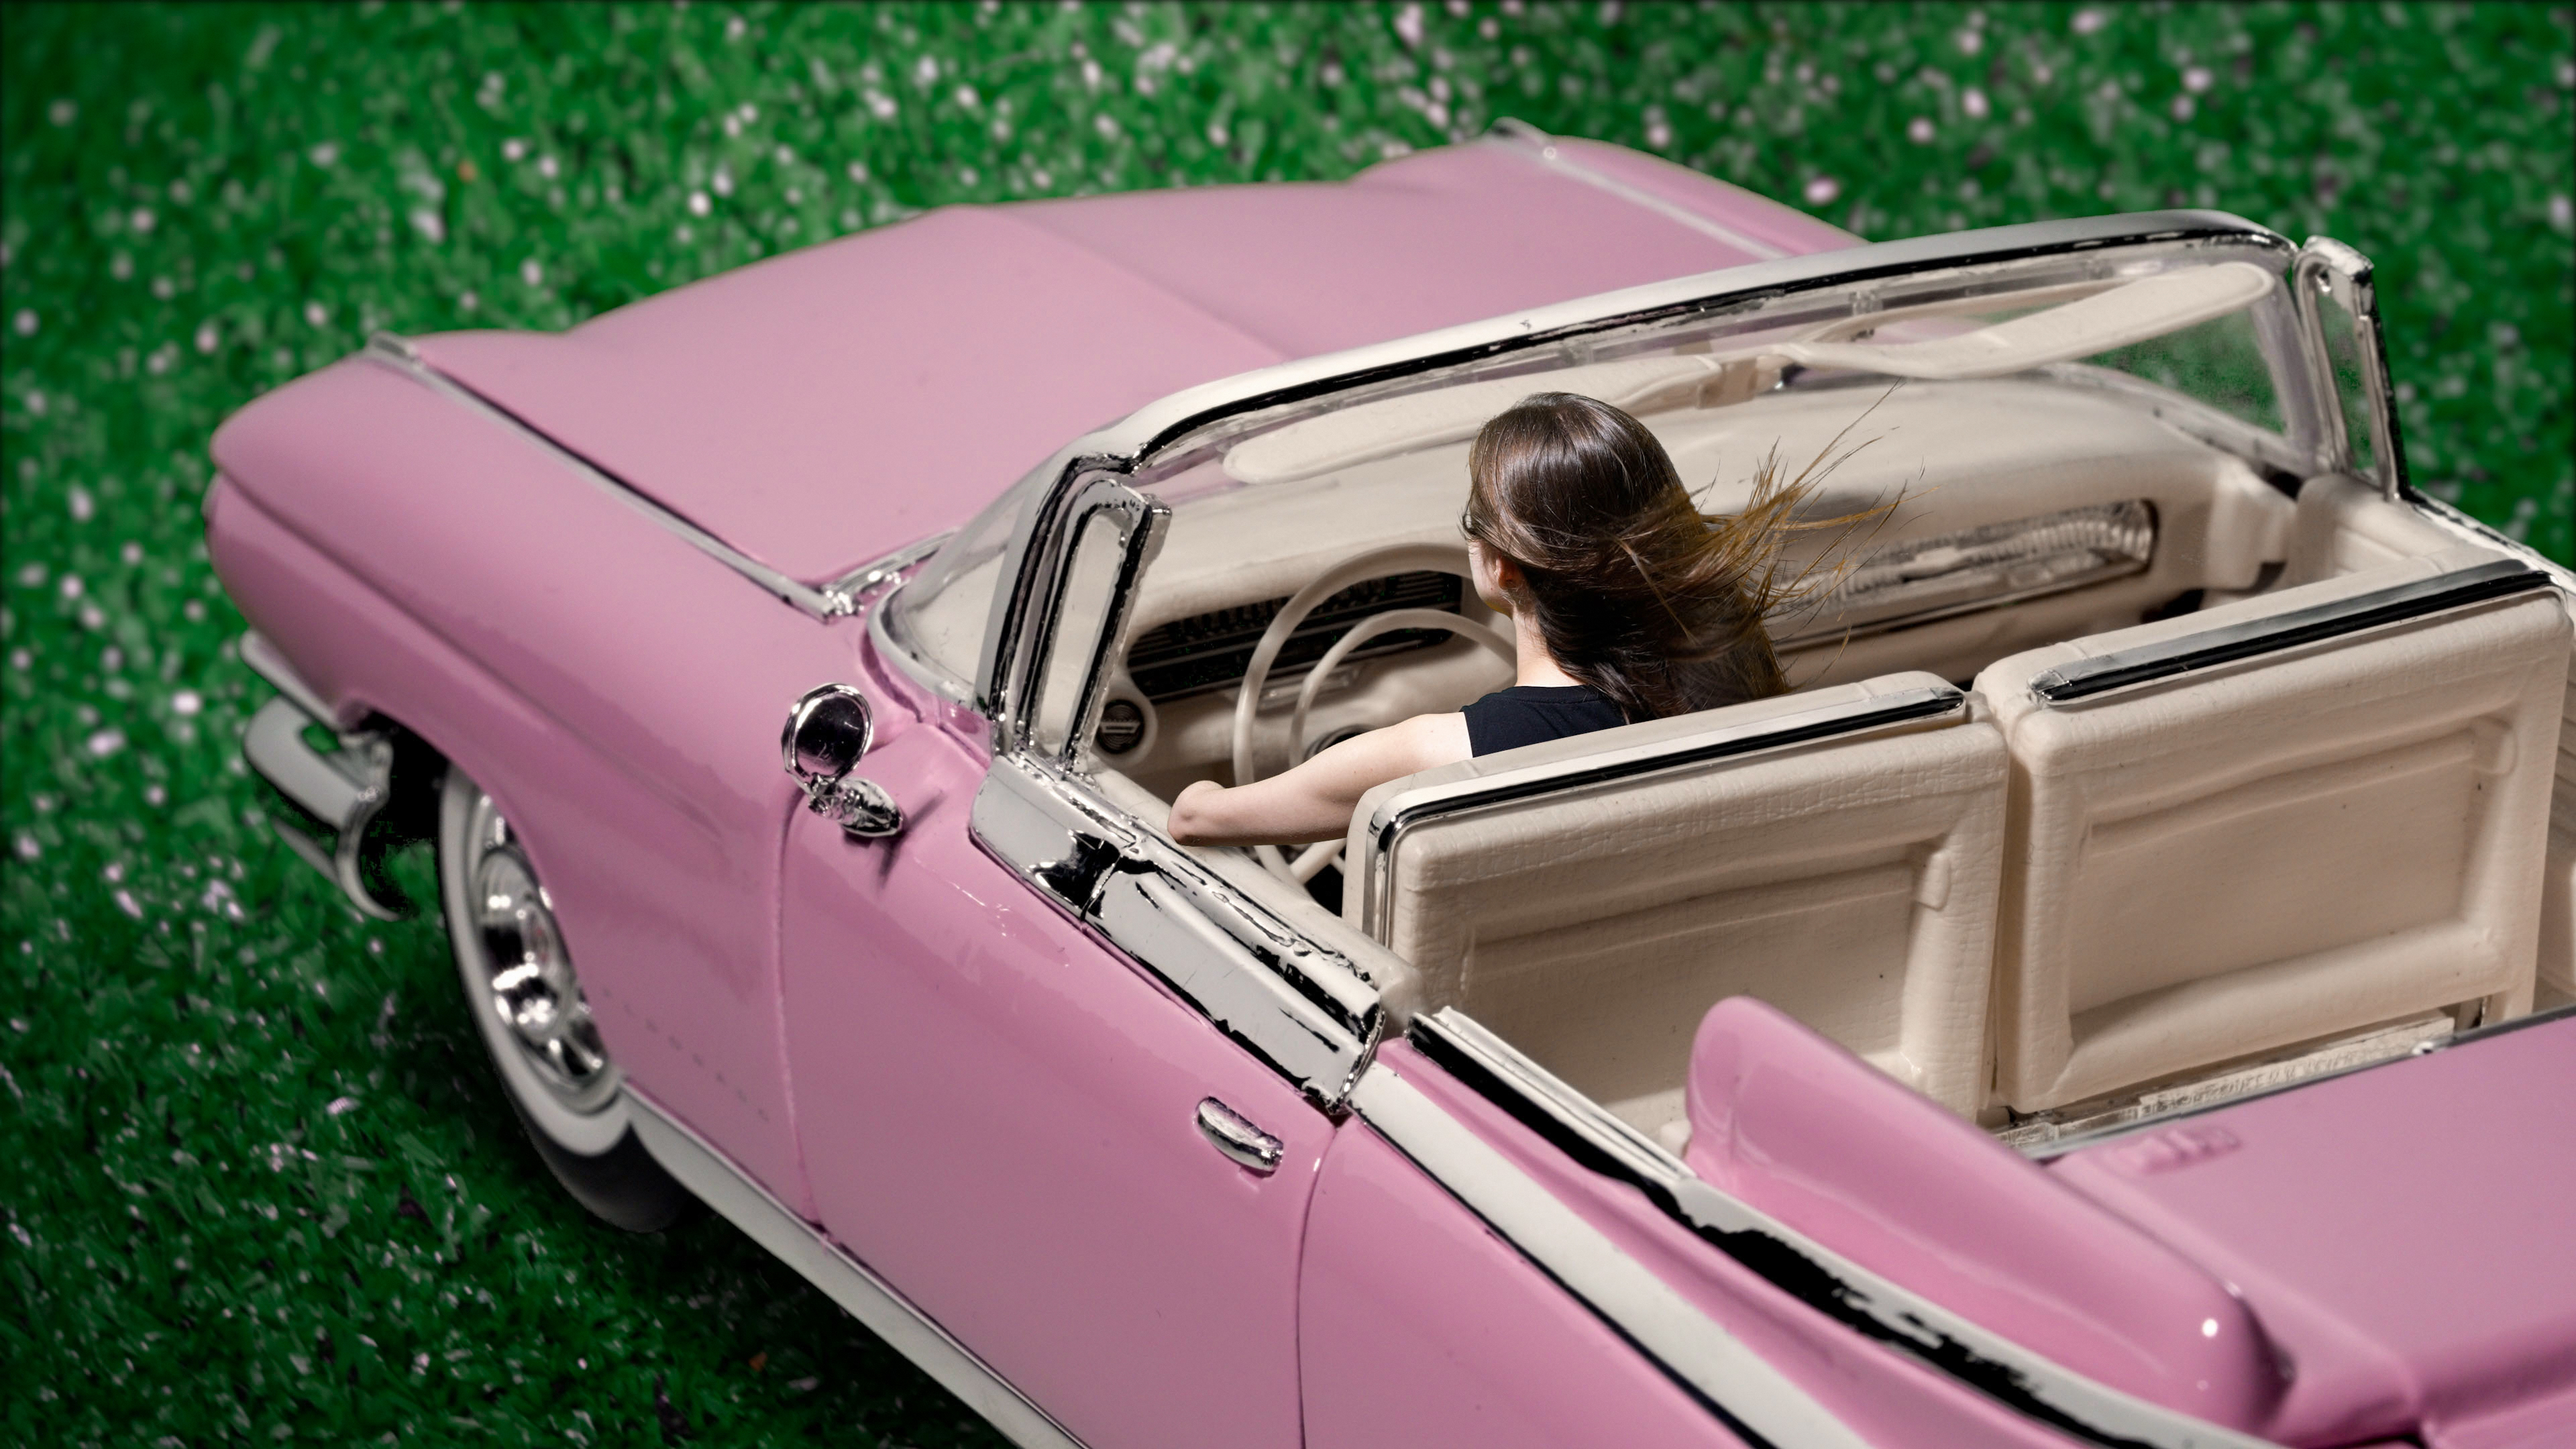 This image is a video still. It presents the front half of a toy pink convertible Cadillac, shot a bit from above, diagonally cutting through the frame, from the bottom right corner, heading towards the top left one, but not reaching it. The car is placed on a background made from fake green grass. In the car, at the steering wheel is a white woman with brown long hair flowing in the wind, wearing a black tank top. She is presented from the back, and is resting her left elbow on the door of the convertible. Her left arm ends right under her elbow.